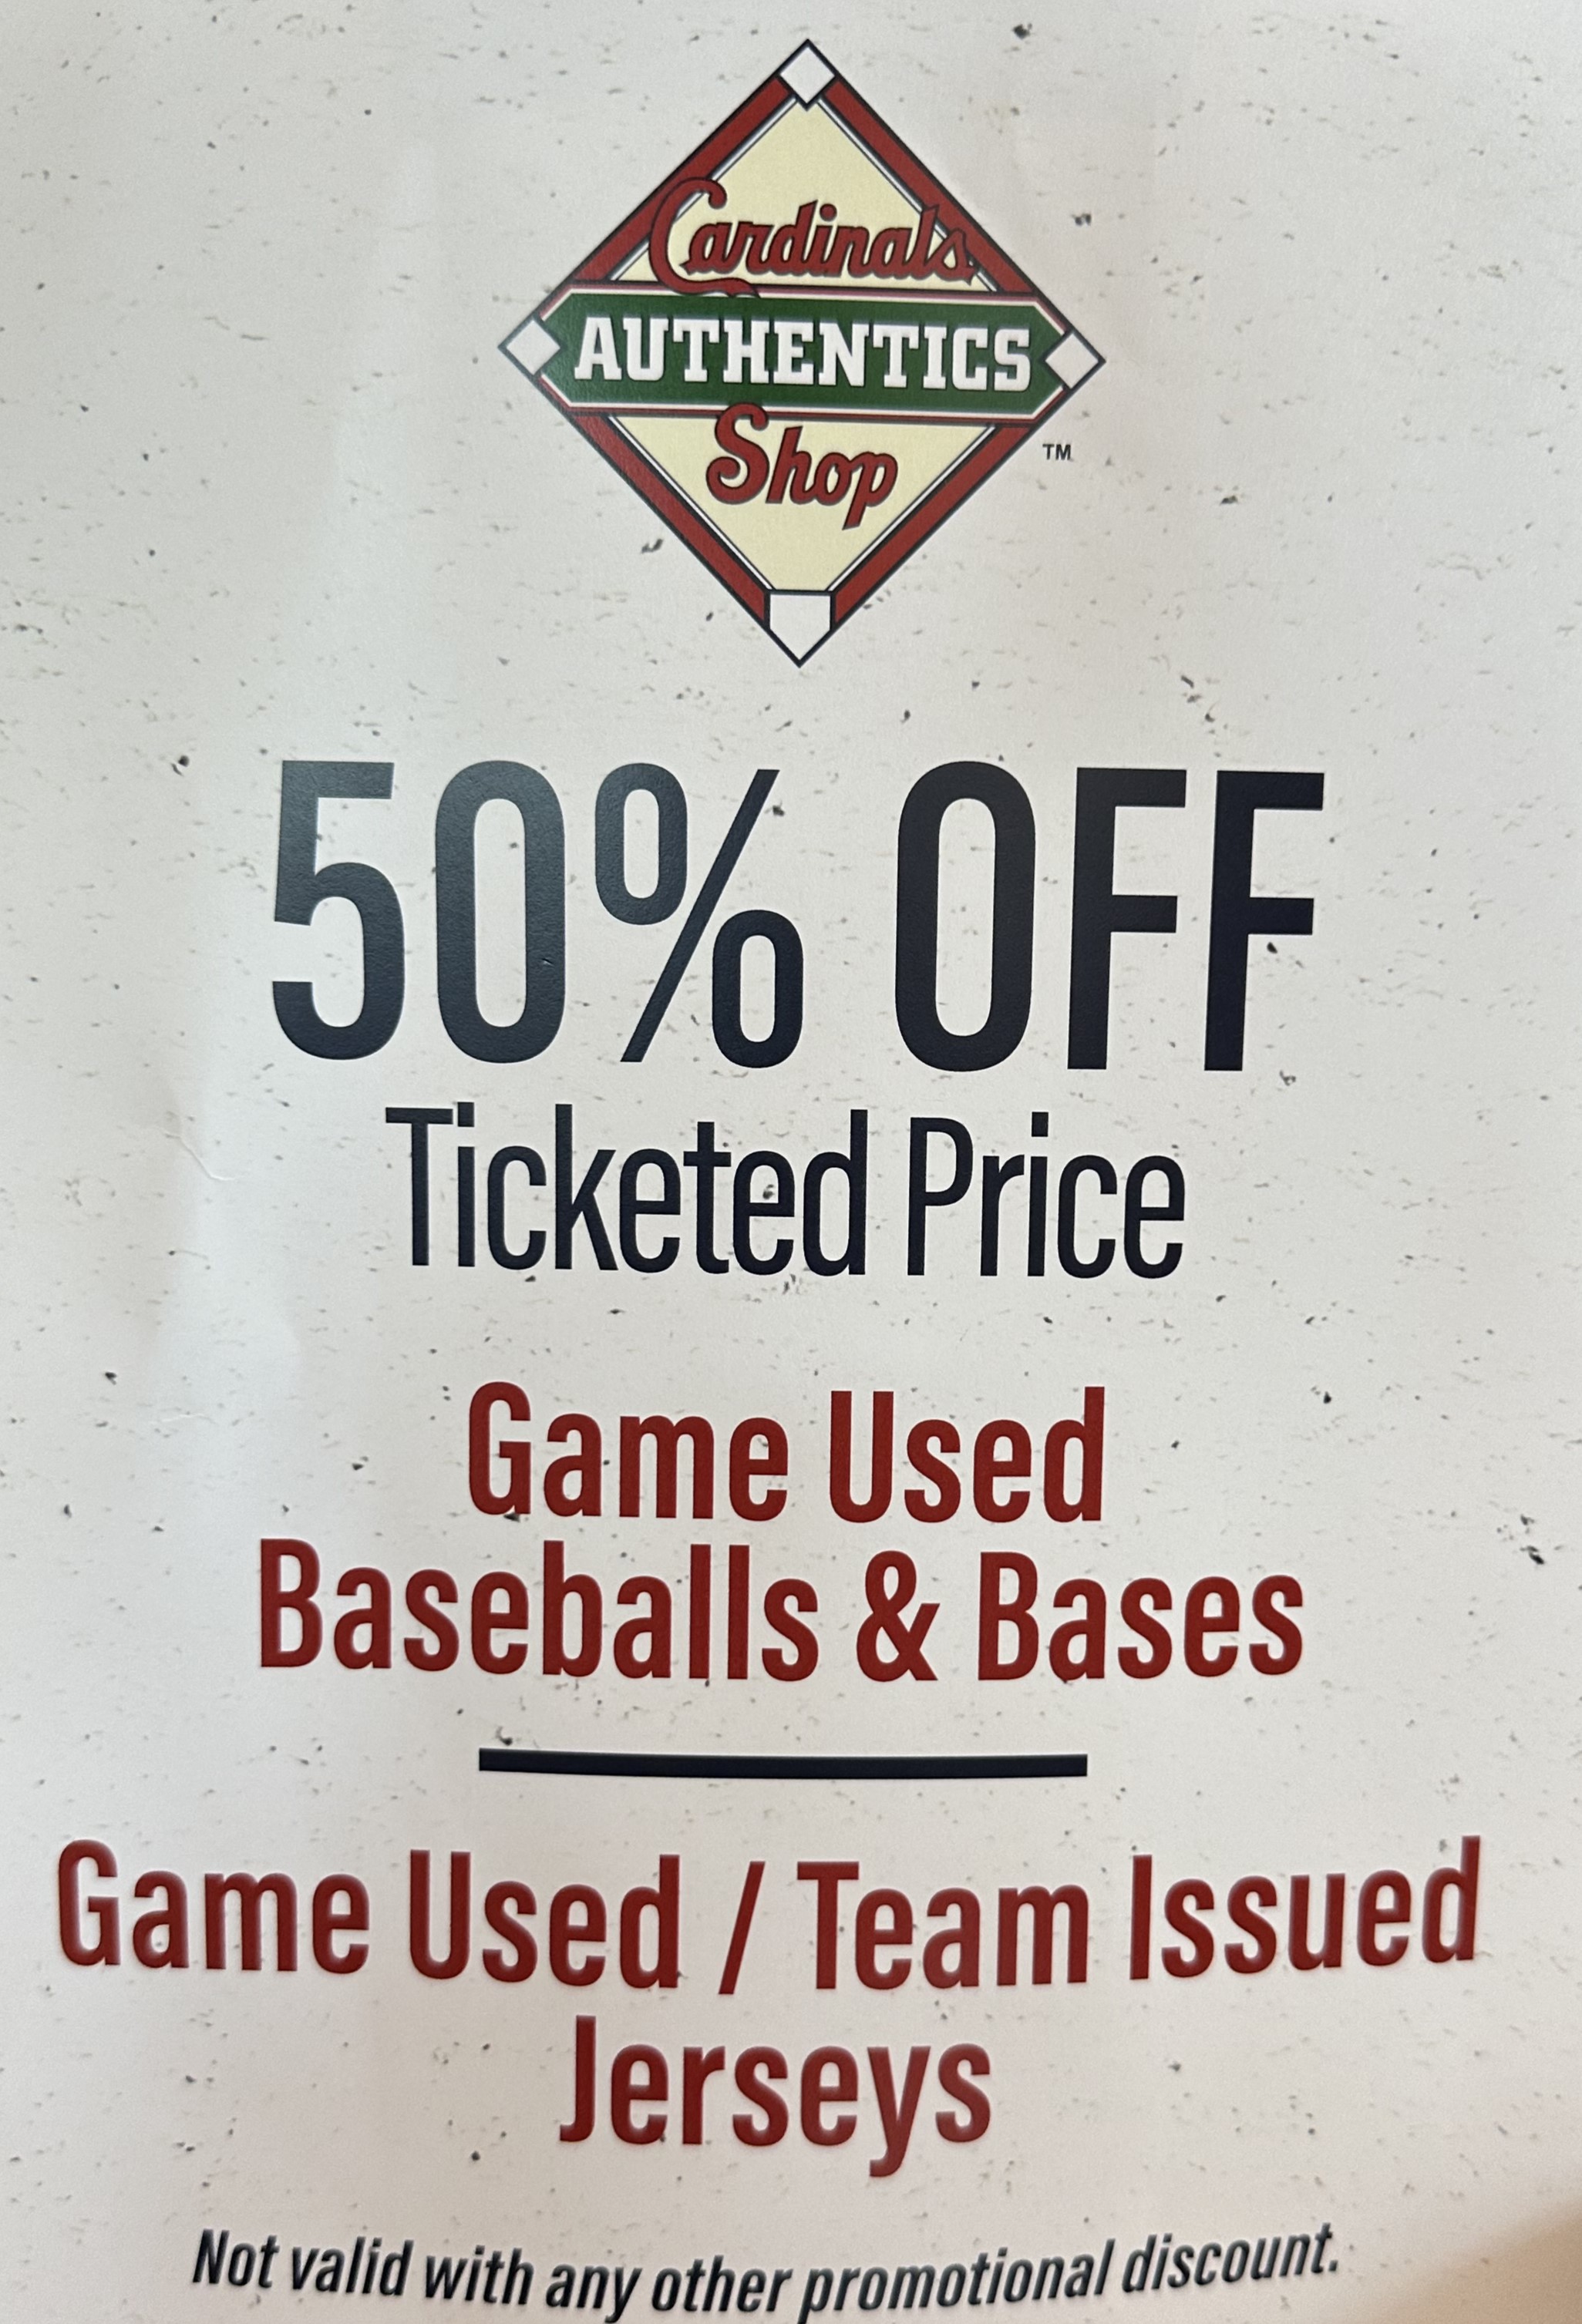 St. Louis Cardinals Game Used MLB Memorabilia for sale